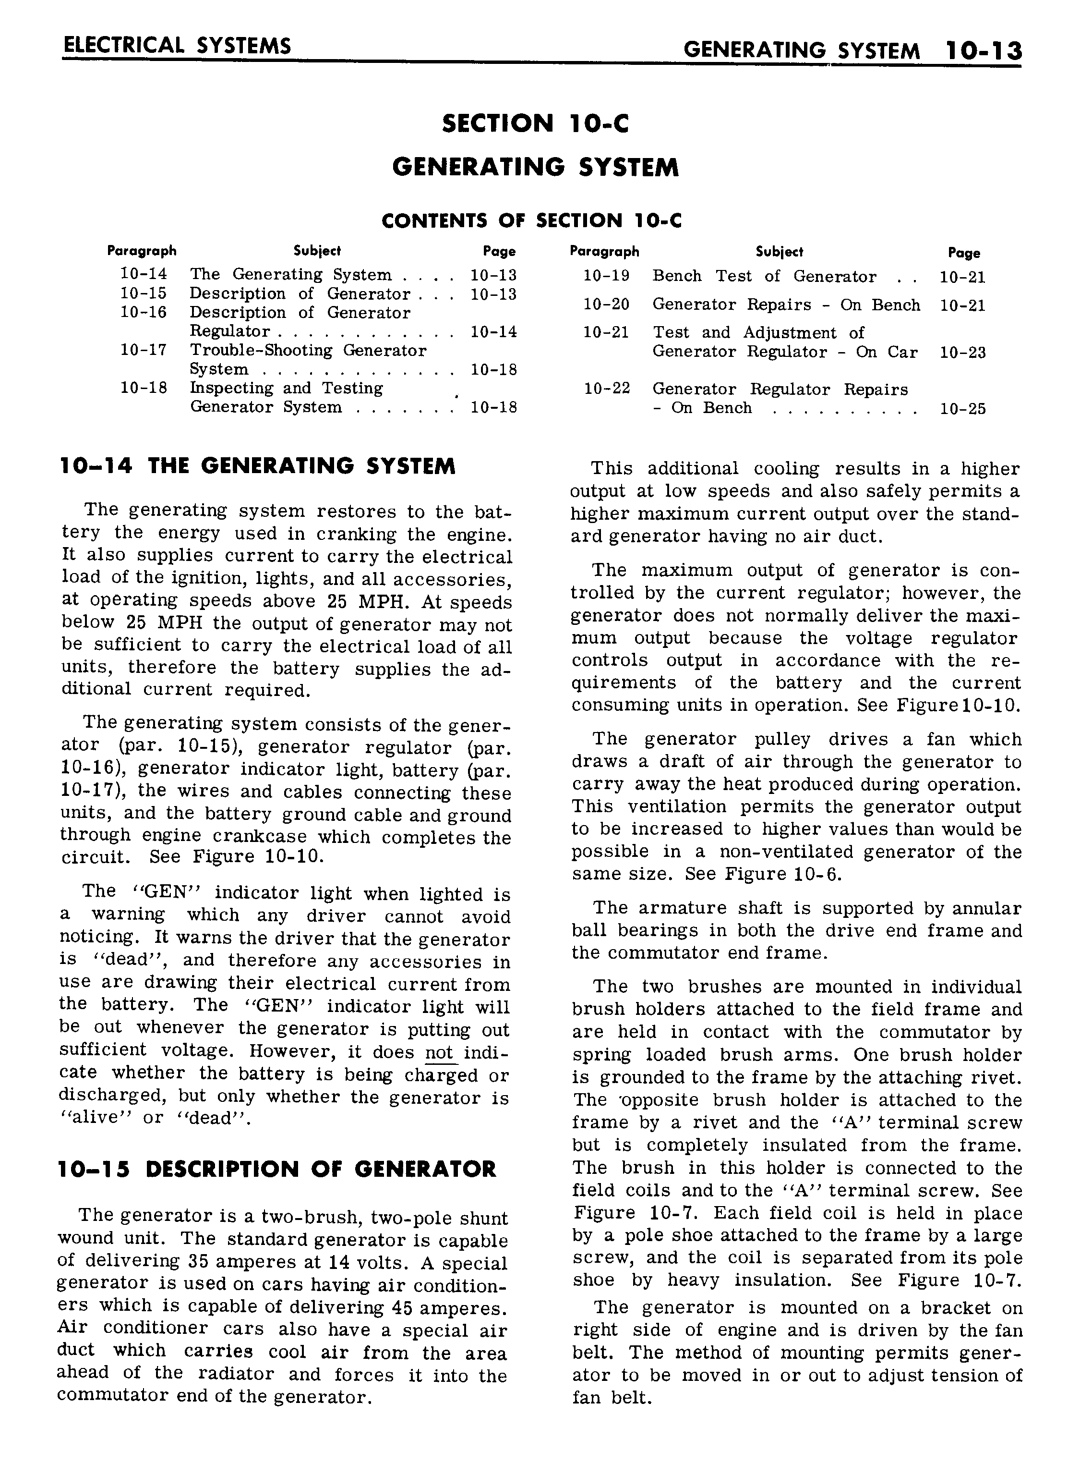 n_10 1961 Buick Shop Manual - Electrical Systems-013-013.jpg